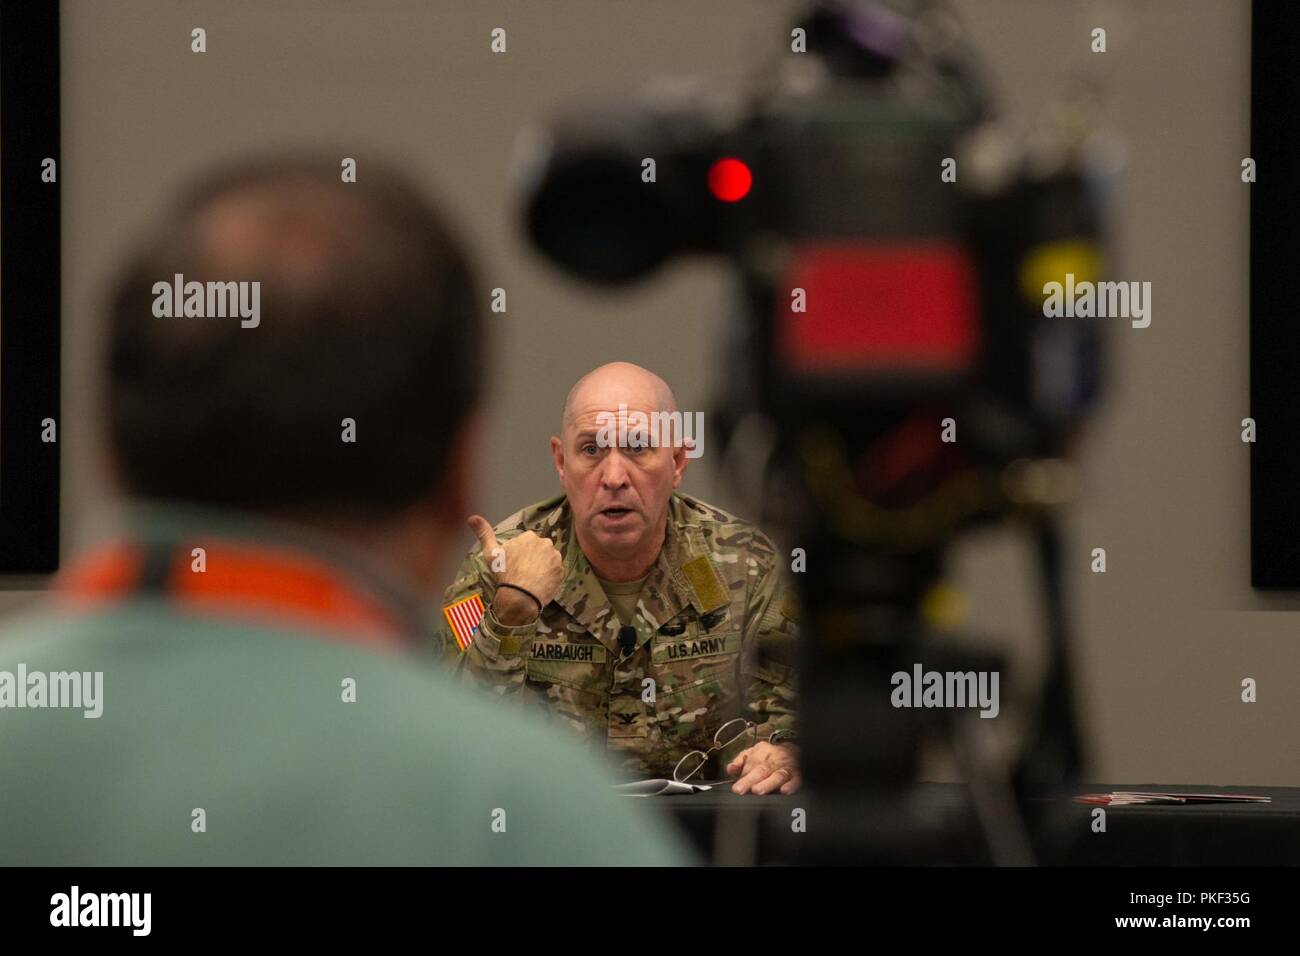 Army Col. Cary Harbaugh, U.S. Special Operations Command Warrior Games 2019 director, briefs local media on the 2019 DoD Warrior Games in Tampa, Fla., Aug. 6, 2018. The games, scheduled from June 21-30, introduce wounded, ill and injured service members and veterans to paralympic-style sports. More than 300 athletes will compete in 14 events located in downtown Tampa and surrounding areas. ( Stock Photo